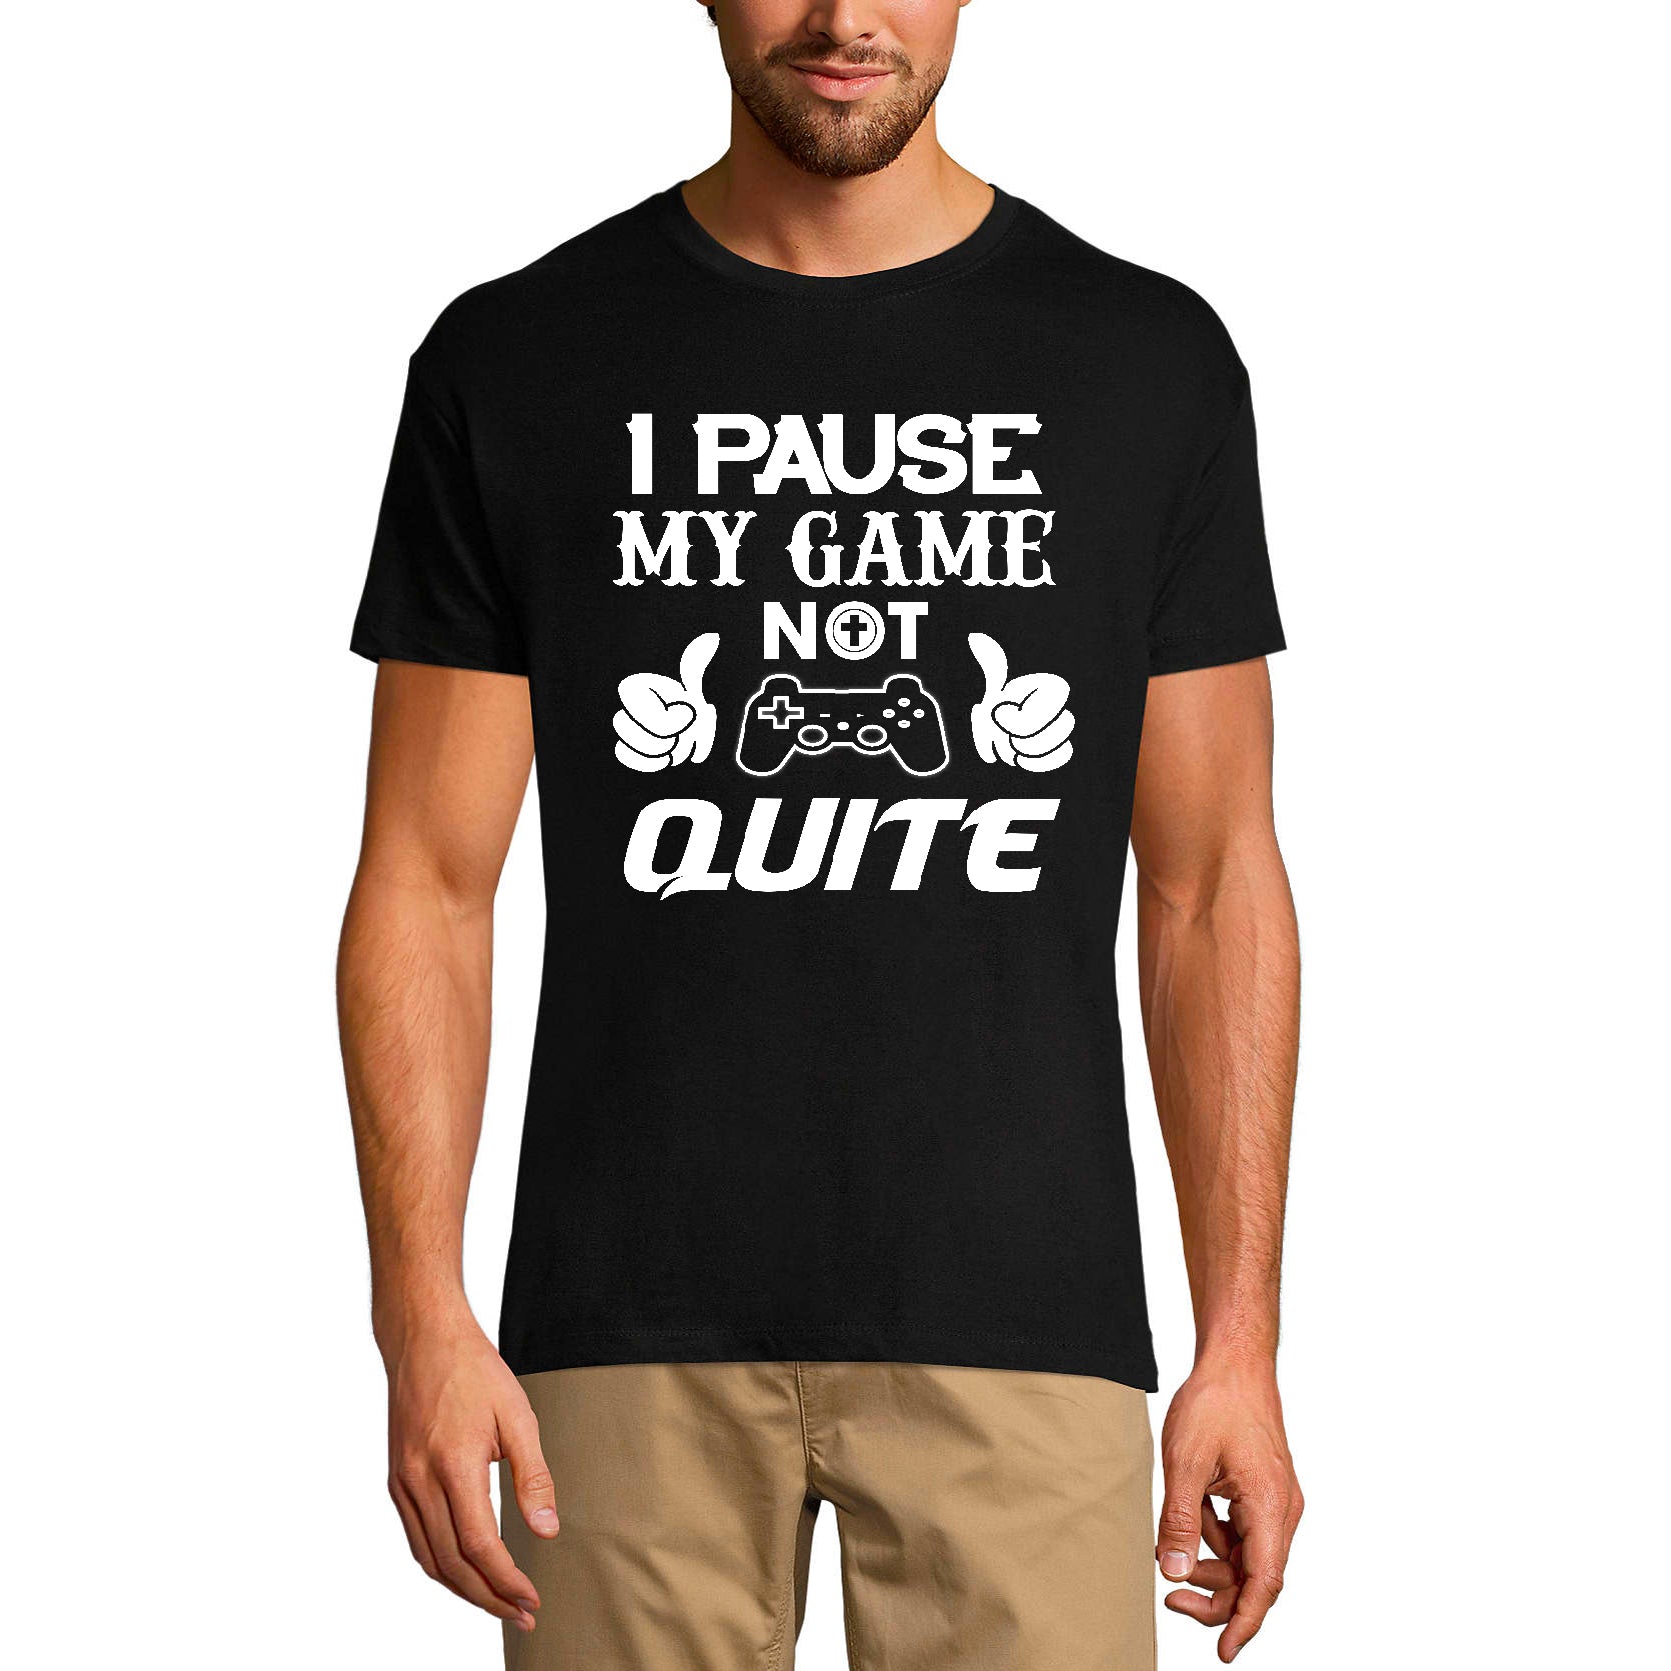 ULTRABASIC Men's T-Shirt I Pause My Game Not Quite - Humor Joke - Graphic Apparel humor joke dad gamer i paused my game alien player ufo playstation tee shirt clothes gaming apparel gifts super mario nintendo call of duty graphic tshirt video game funny geek gift for the gamer fortnite pubg humor son father birthday